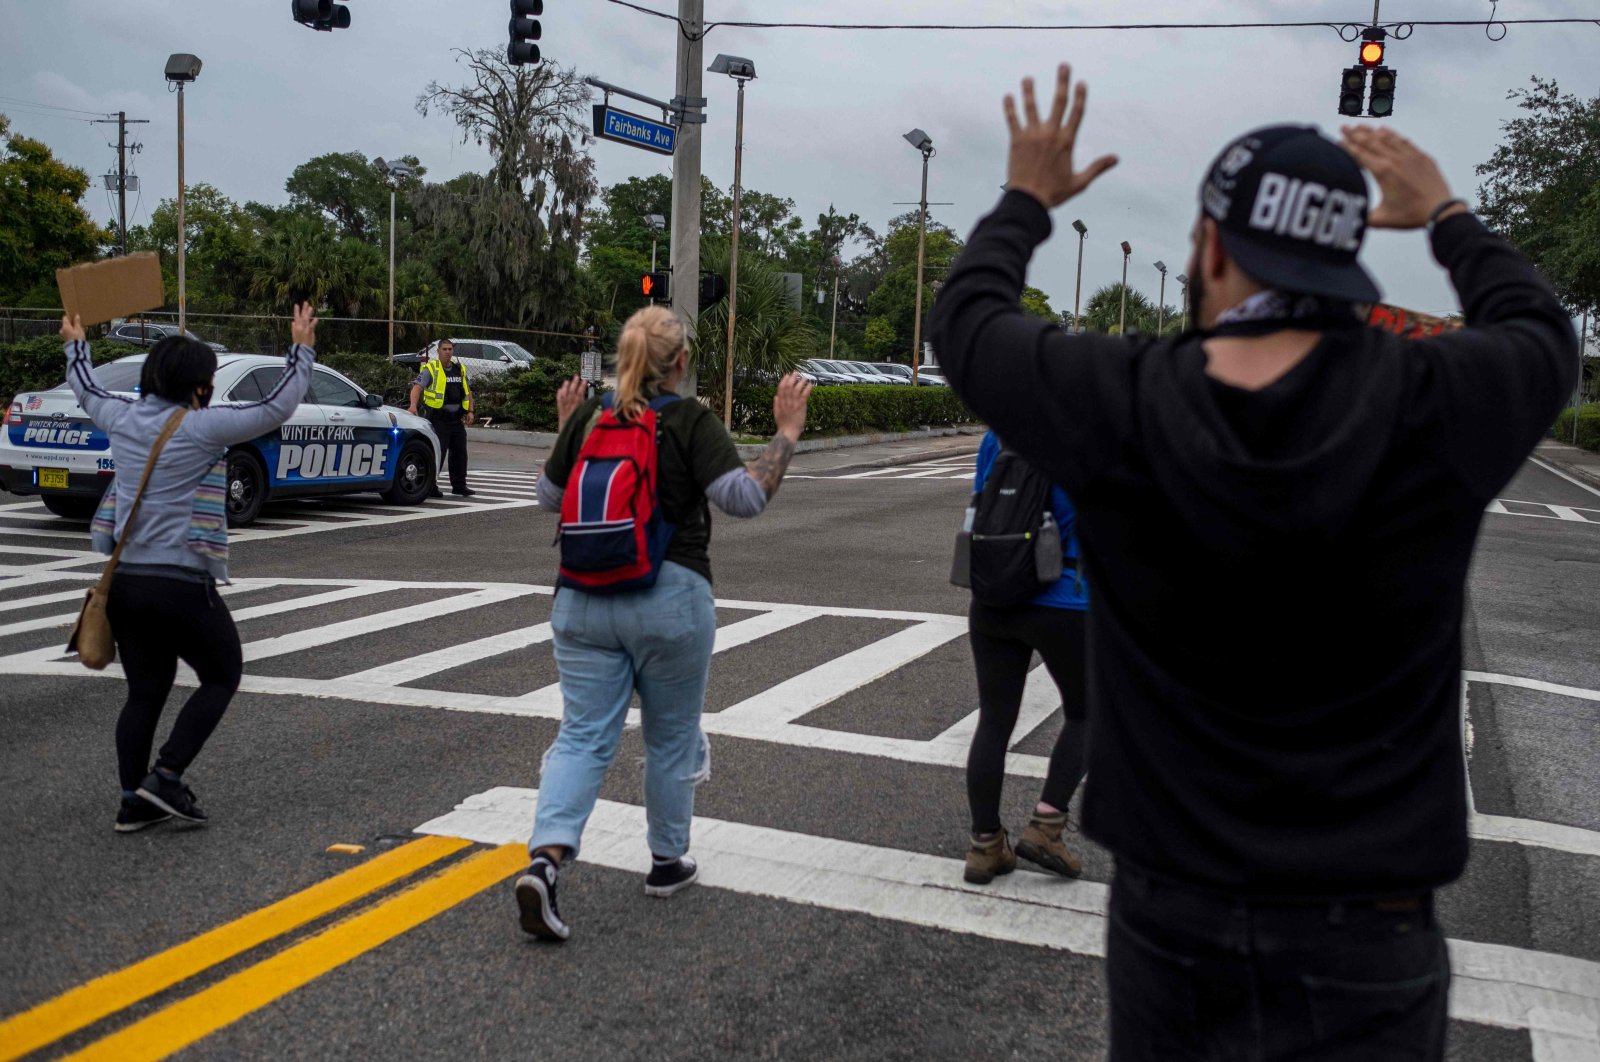 Protesters march during a rally in response to the recent death of George Floyd while in police custody in Minneapolis, in Winter Park, Florida on June 7, 2020. (AFP Photo)